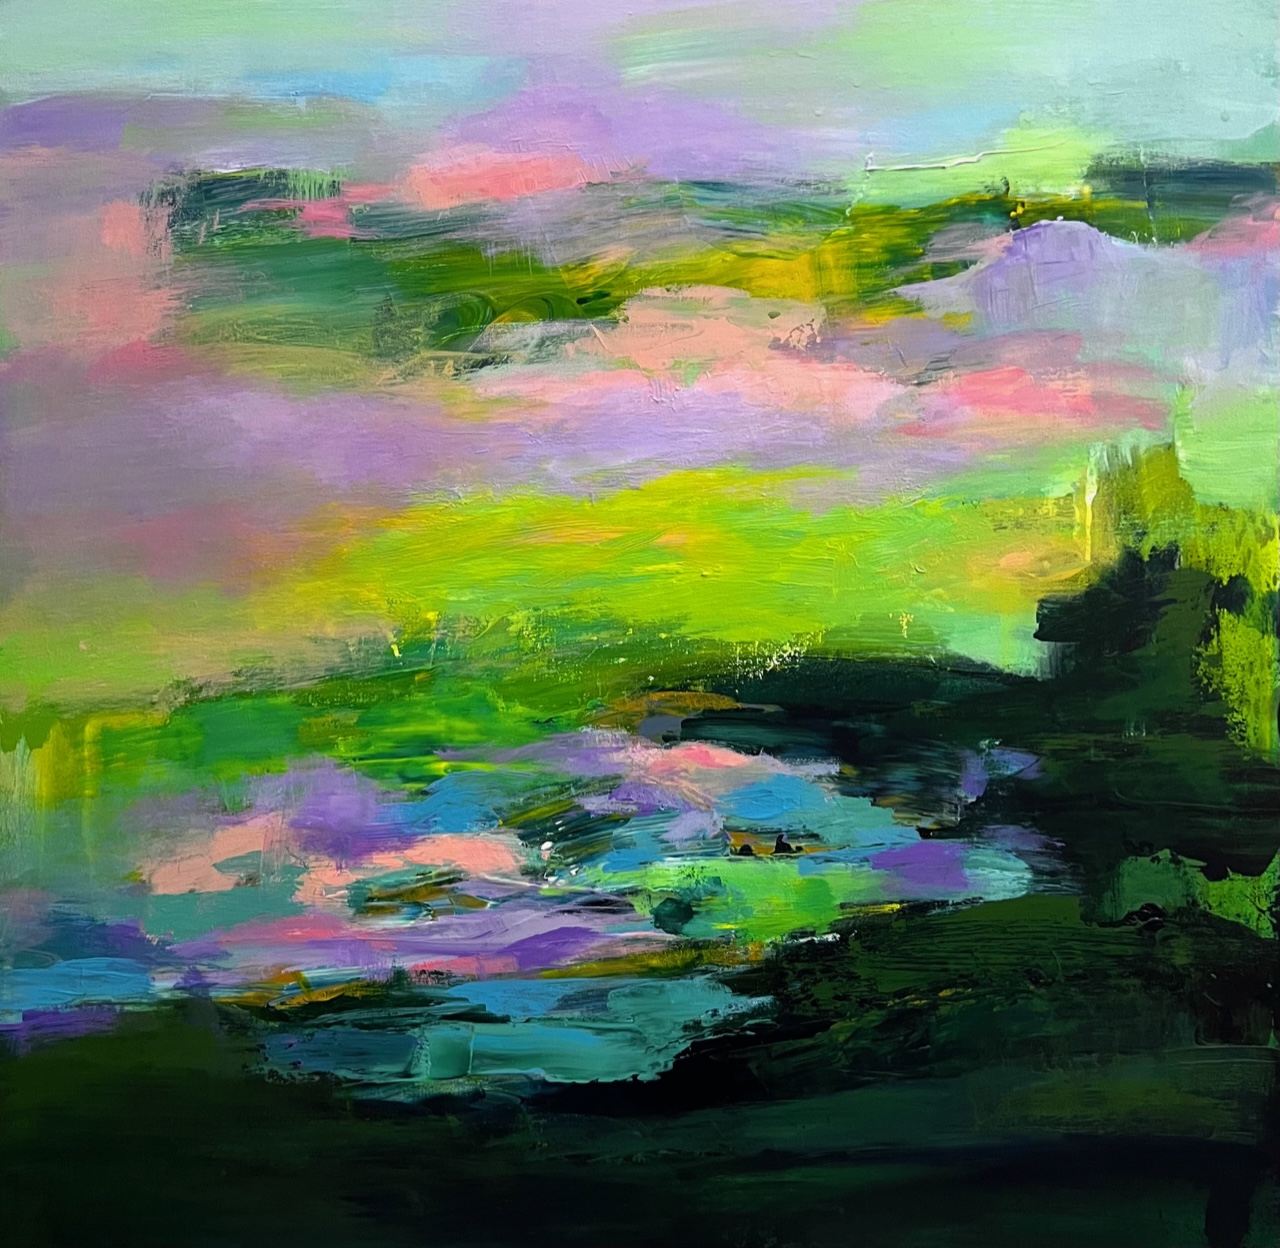 Garden of bliss 03 - Dreamscapes: Paintings/Landscapes: Acrylic on canvas, 76×76cm, USD 1900